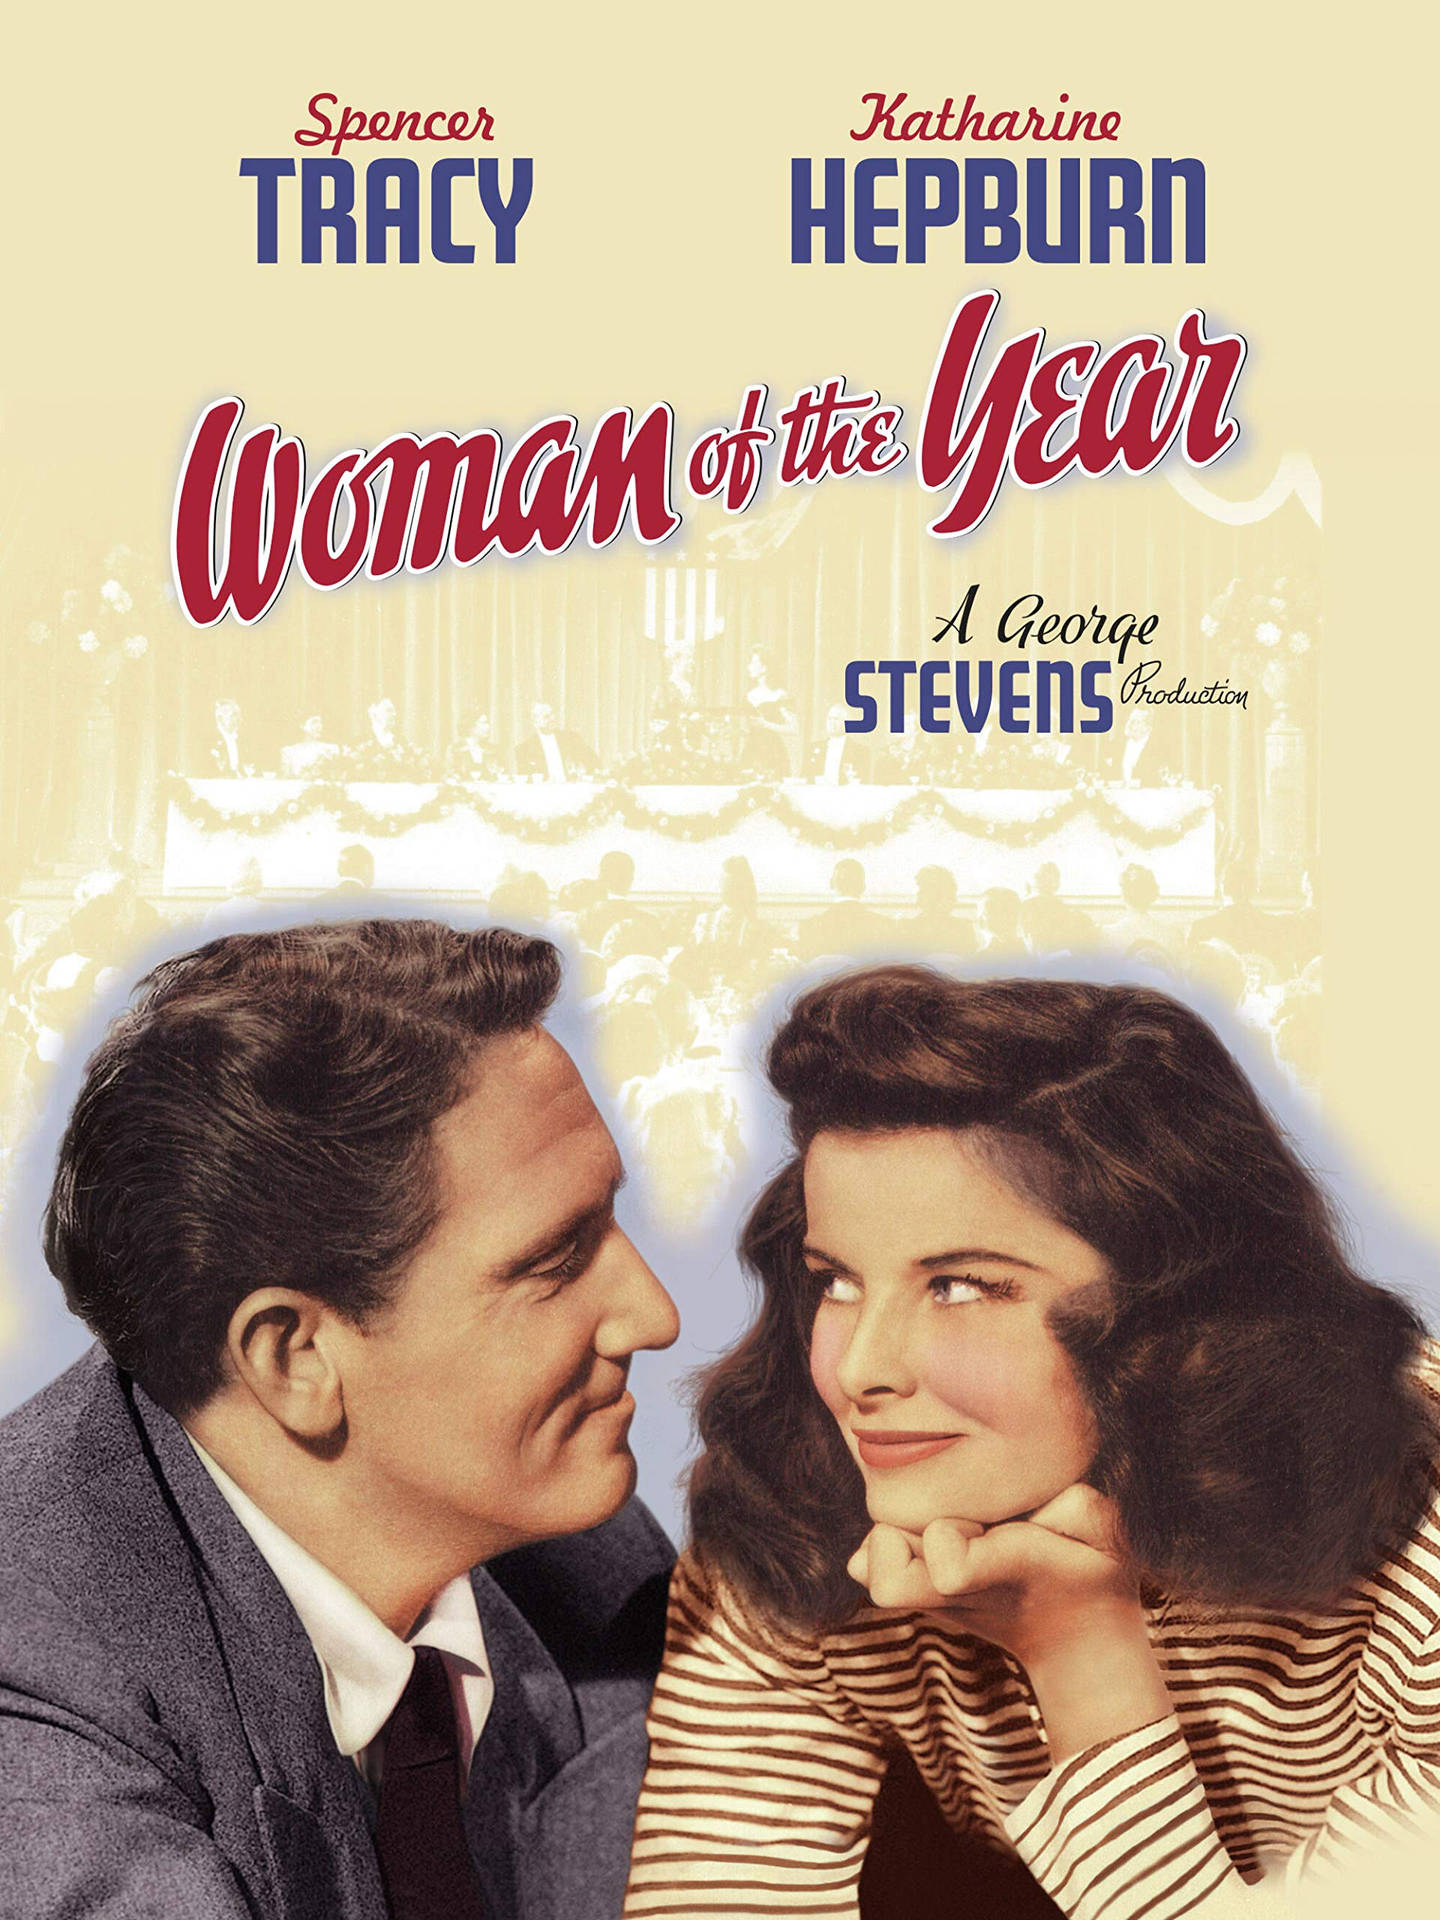 Promotion Poster for "Woman of the Year" starring Spencer Tracy Wallpaper